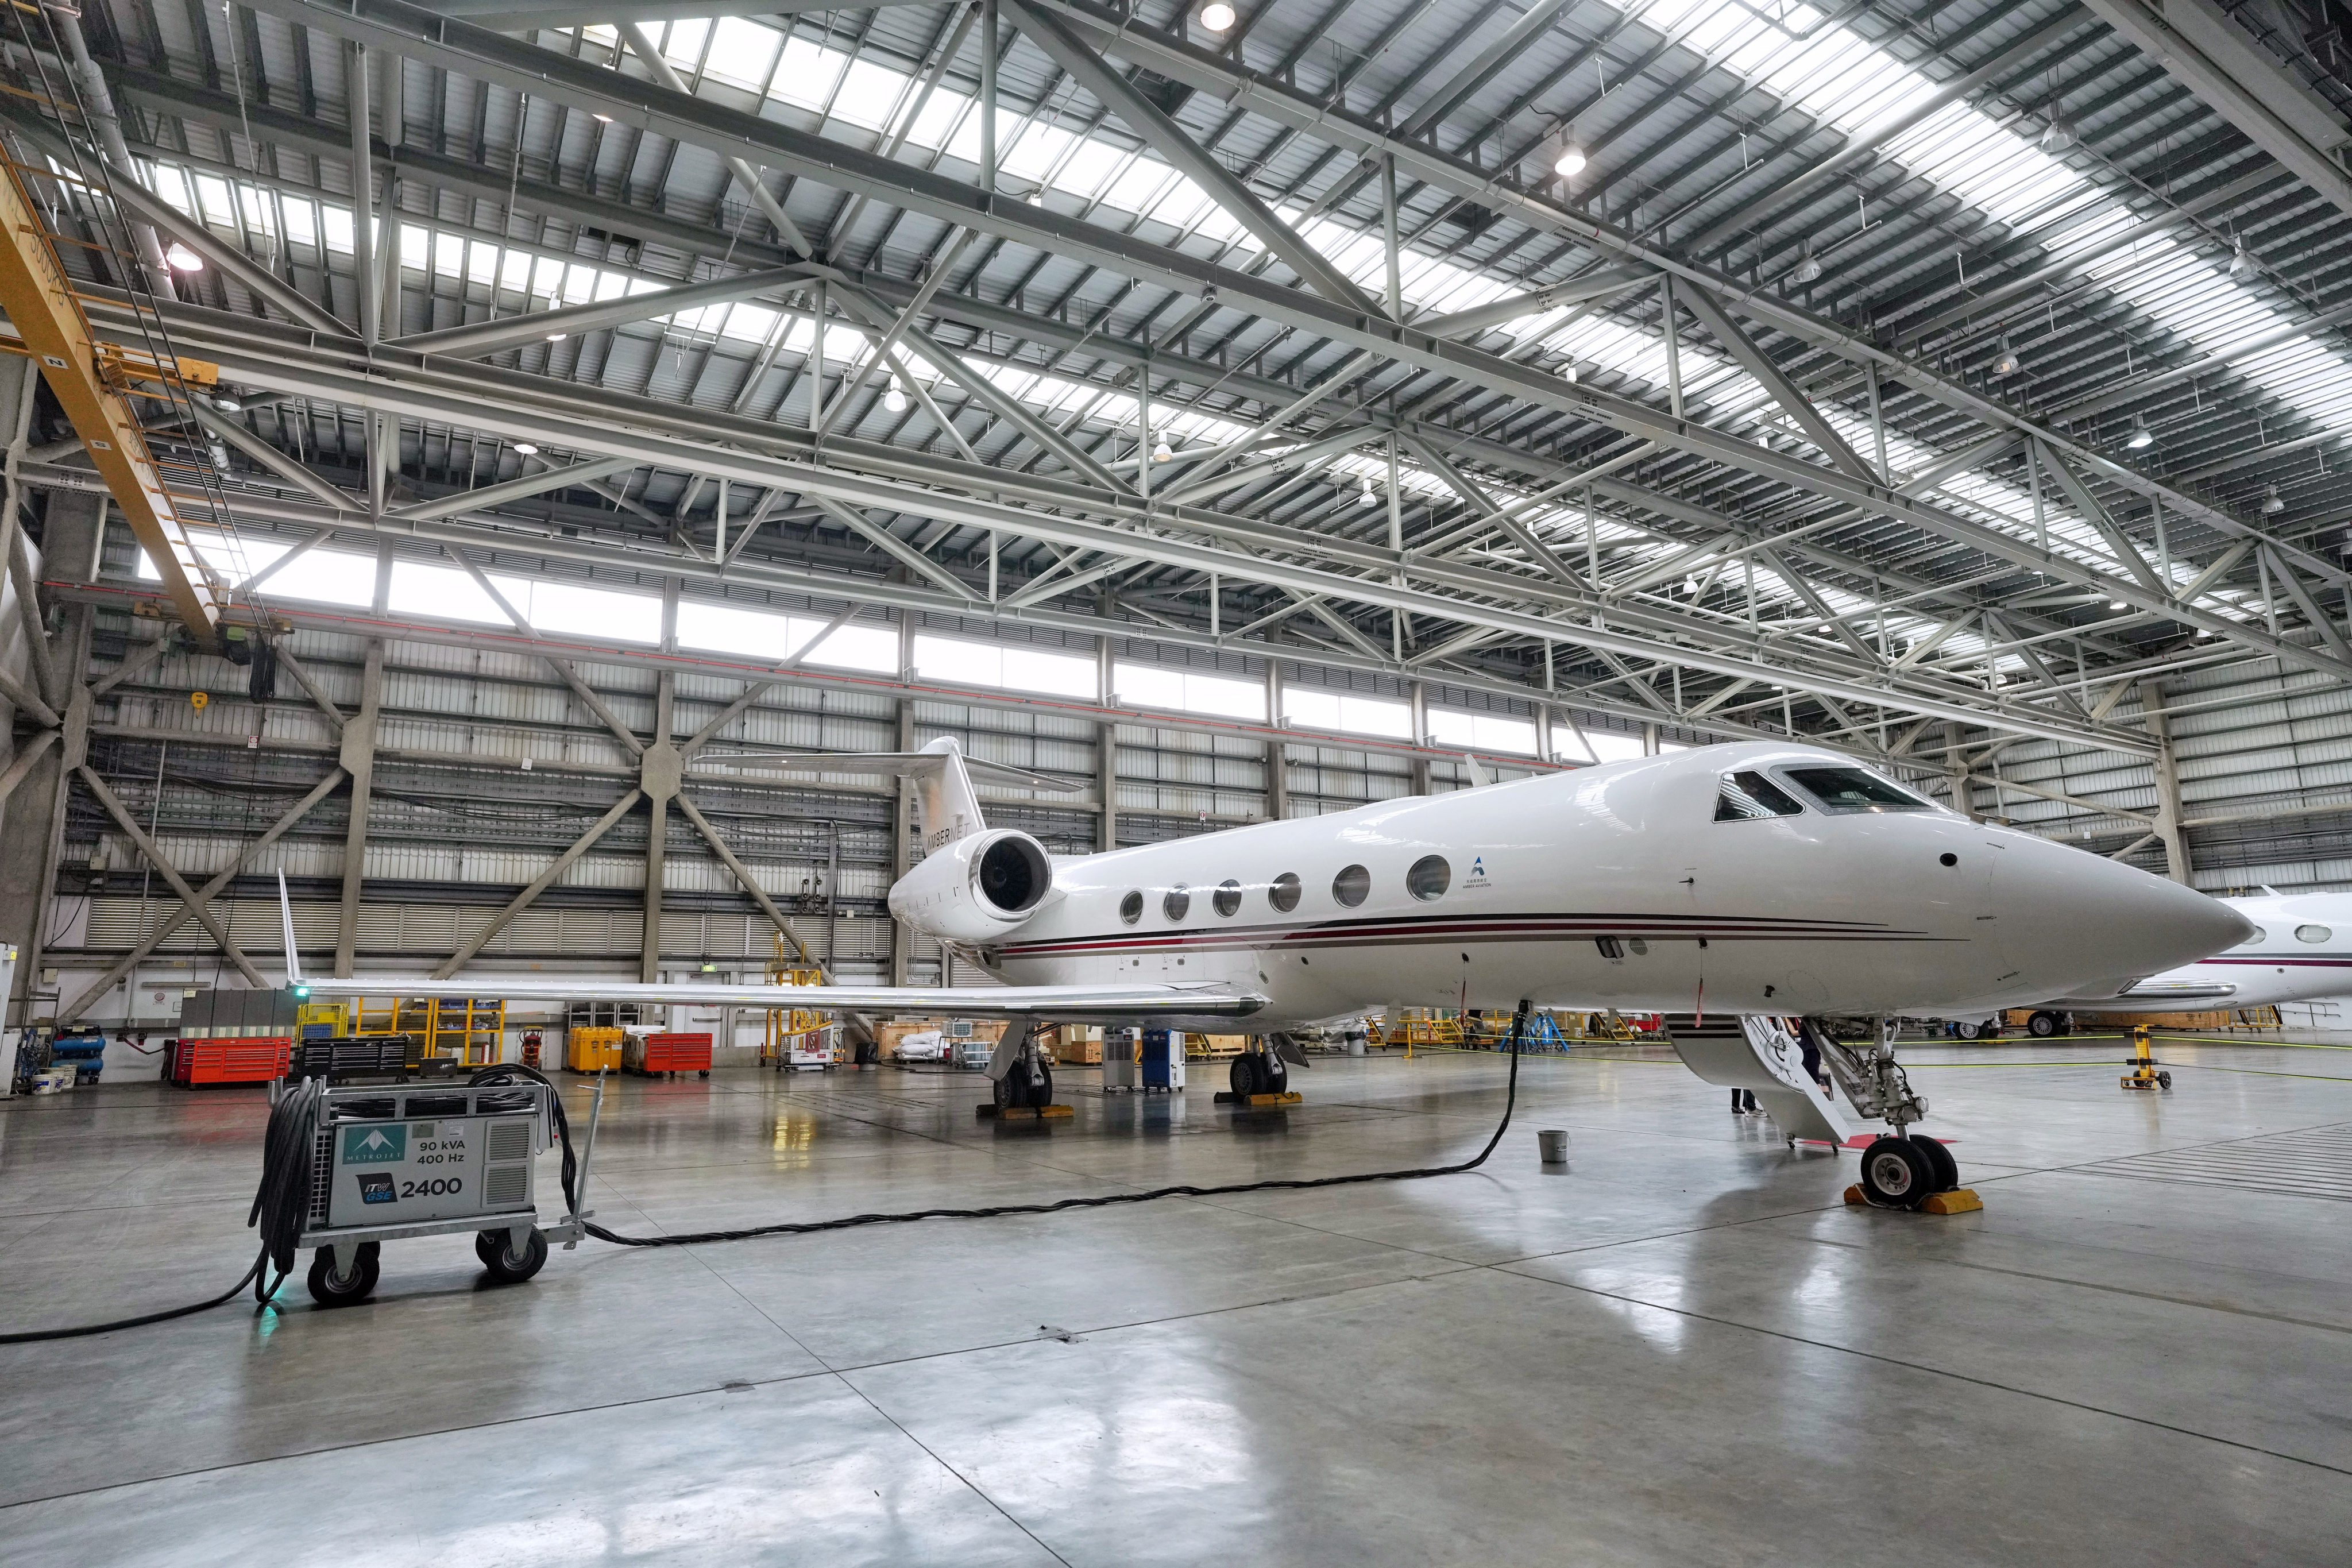 The Hong Kong Business Aviation Centre is also on track with plans to double capacity to 17,000 private jet trips per year, it says. Photo: Elson Li